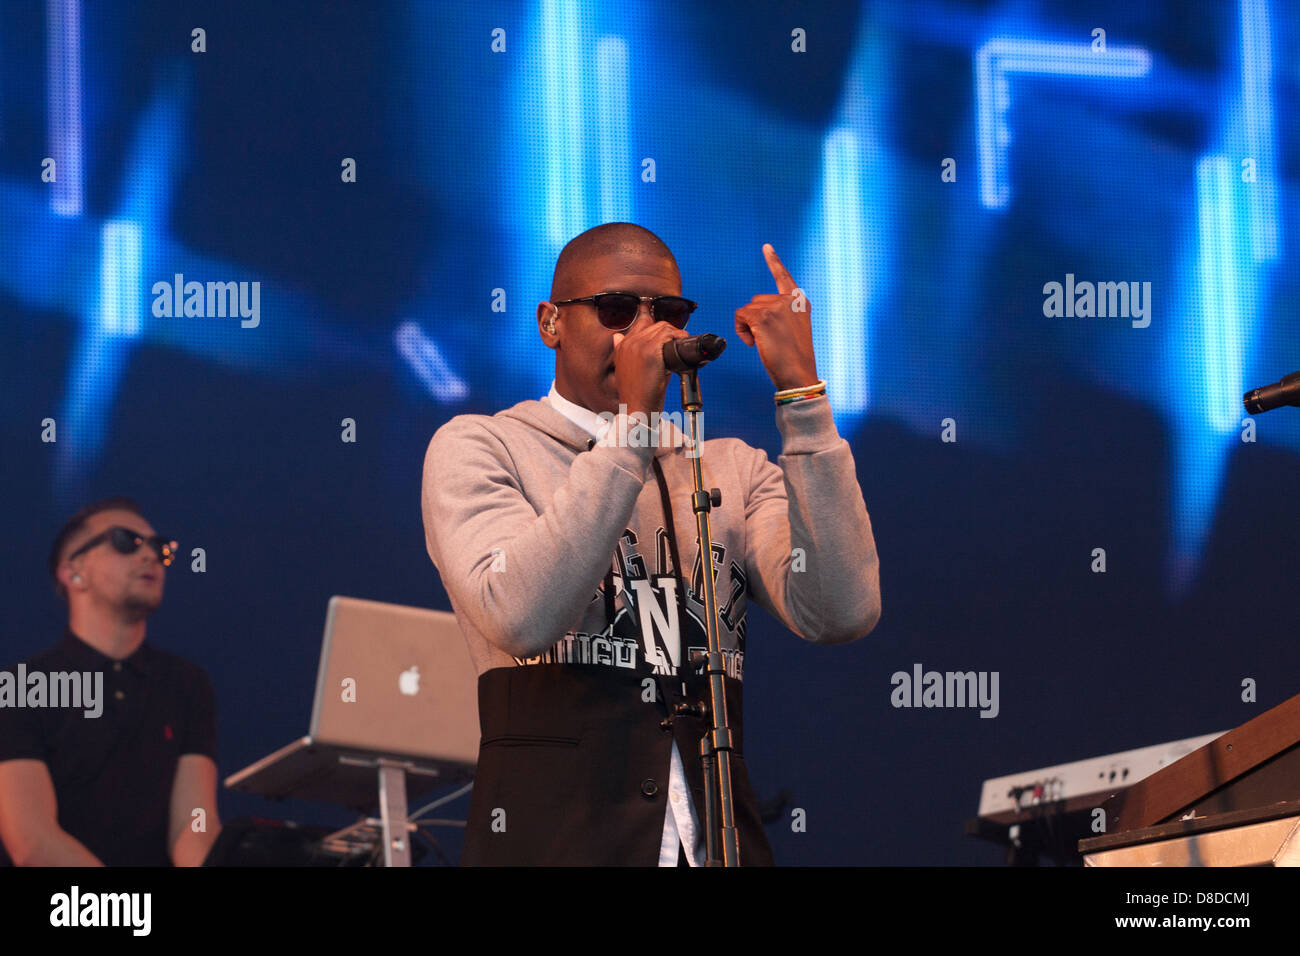 Singer, songwriter, record producer Labrinth at Radio1's One Big Weekend at Ebrington Square, Derry in Northern Ireland. Stock Photo